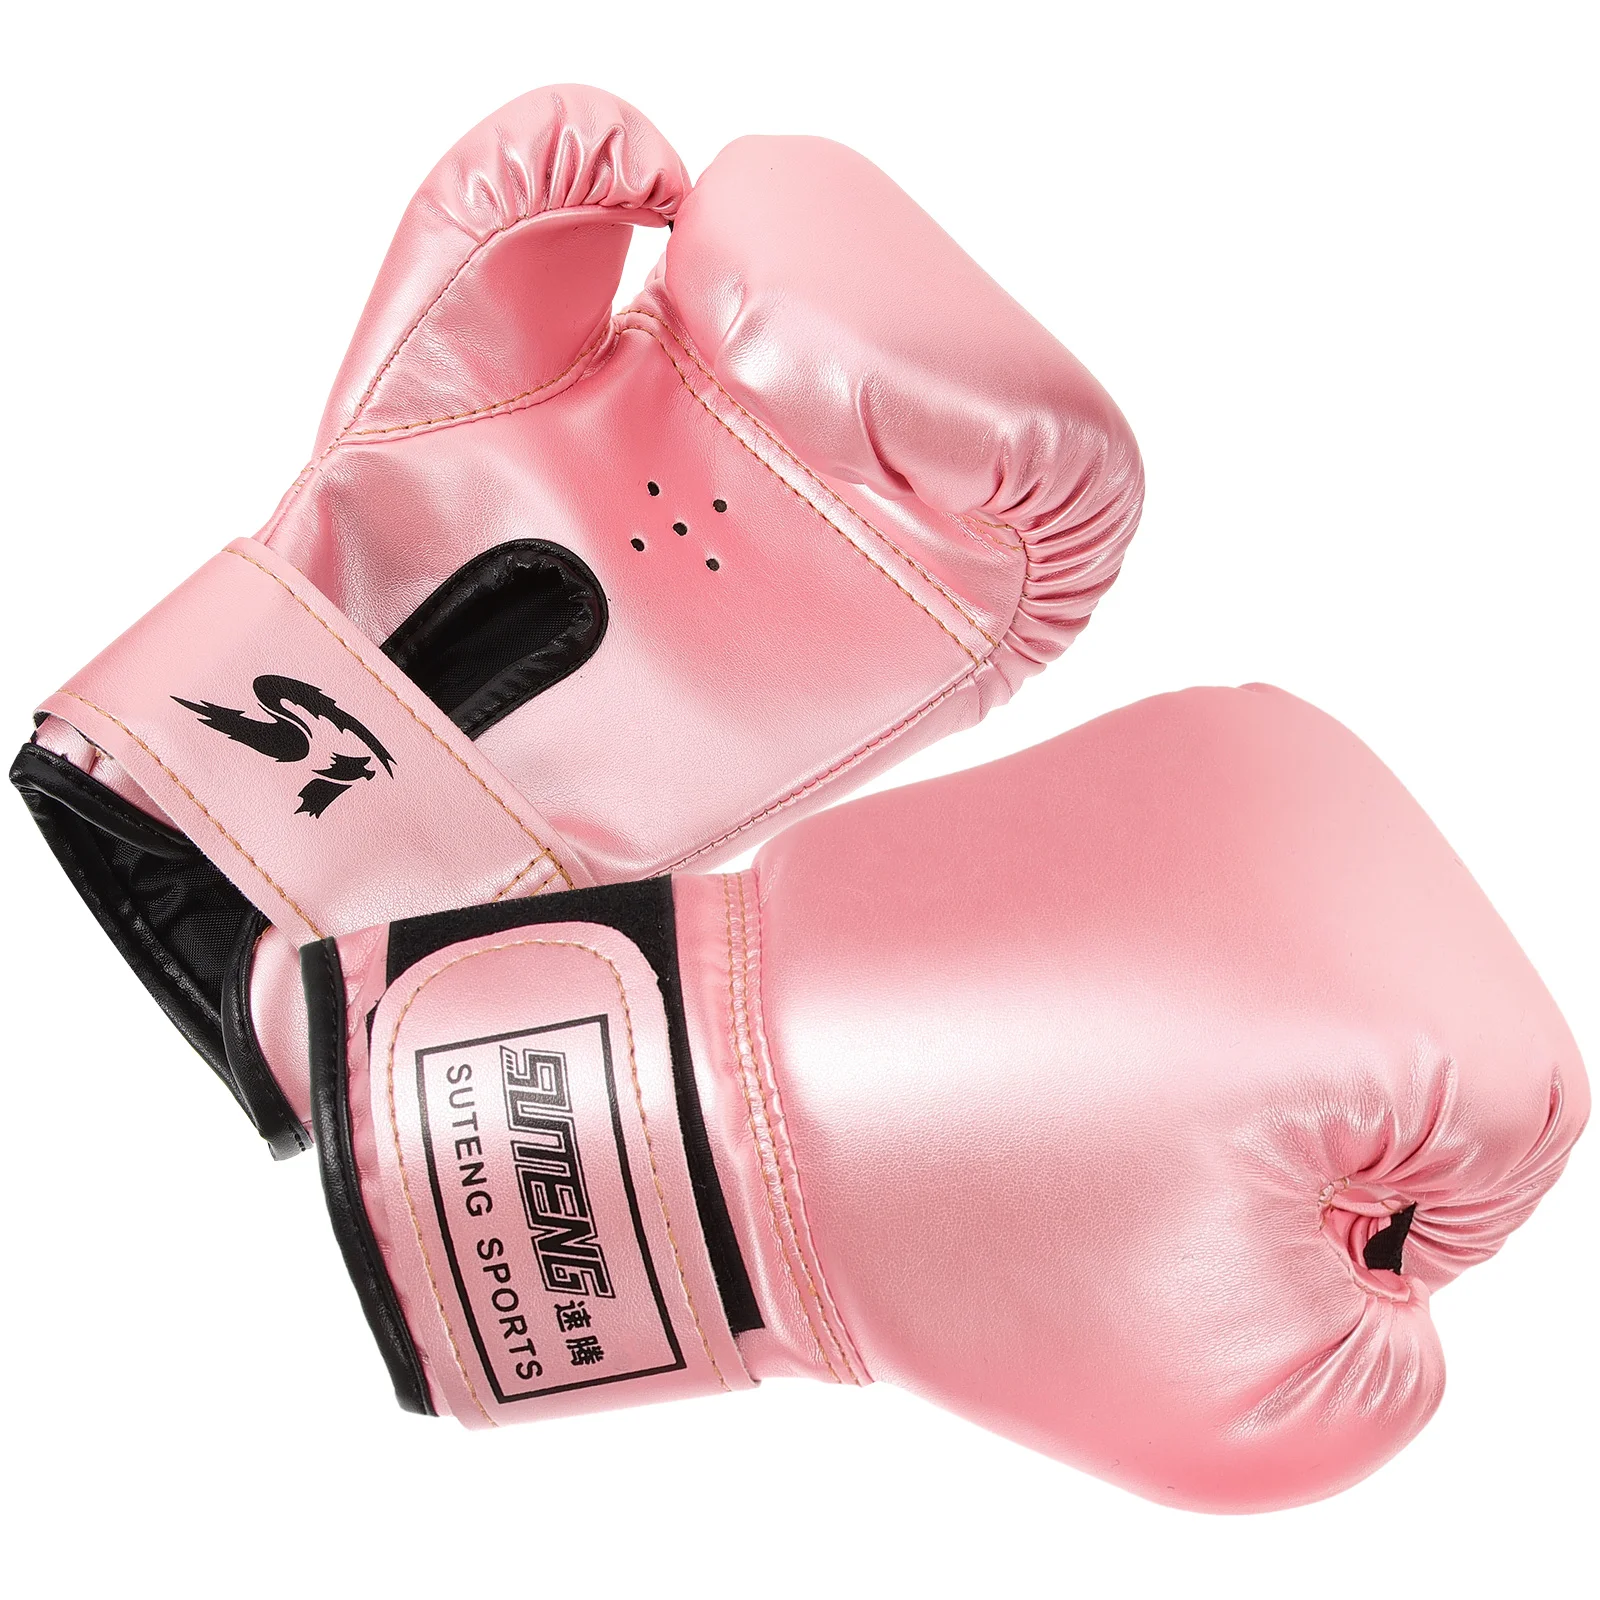 

1 Pair Sports Glove Children Boxing Glove Toddler Kickboxing Glove Sparring Glove for Practicing